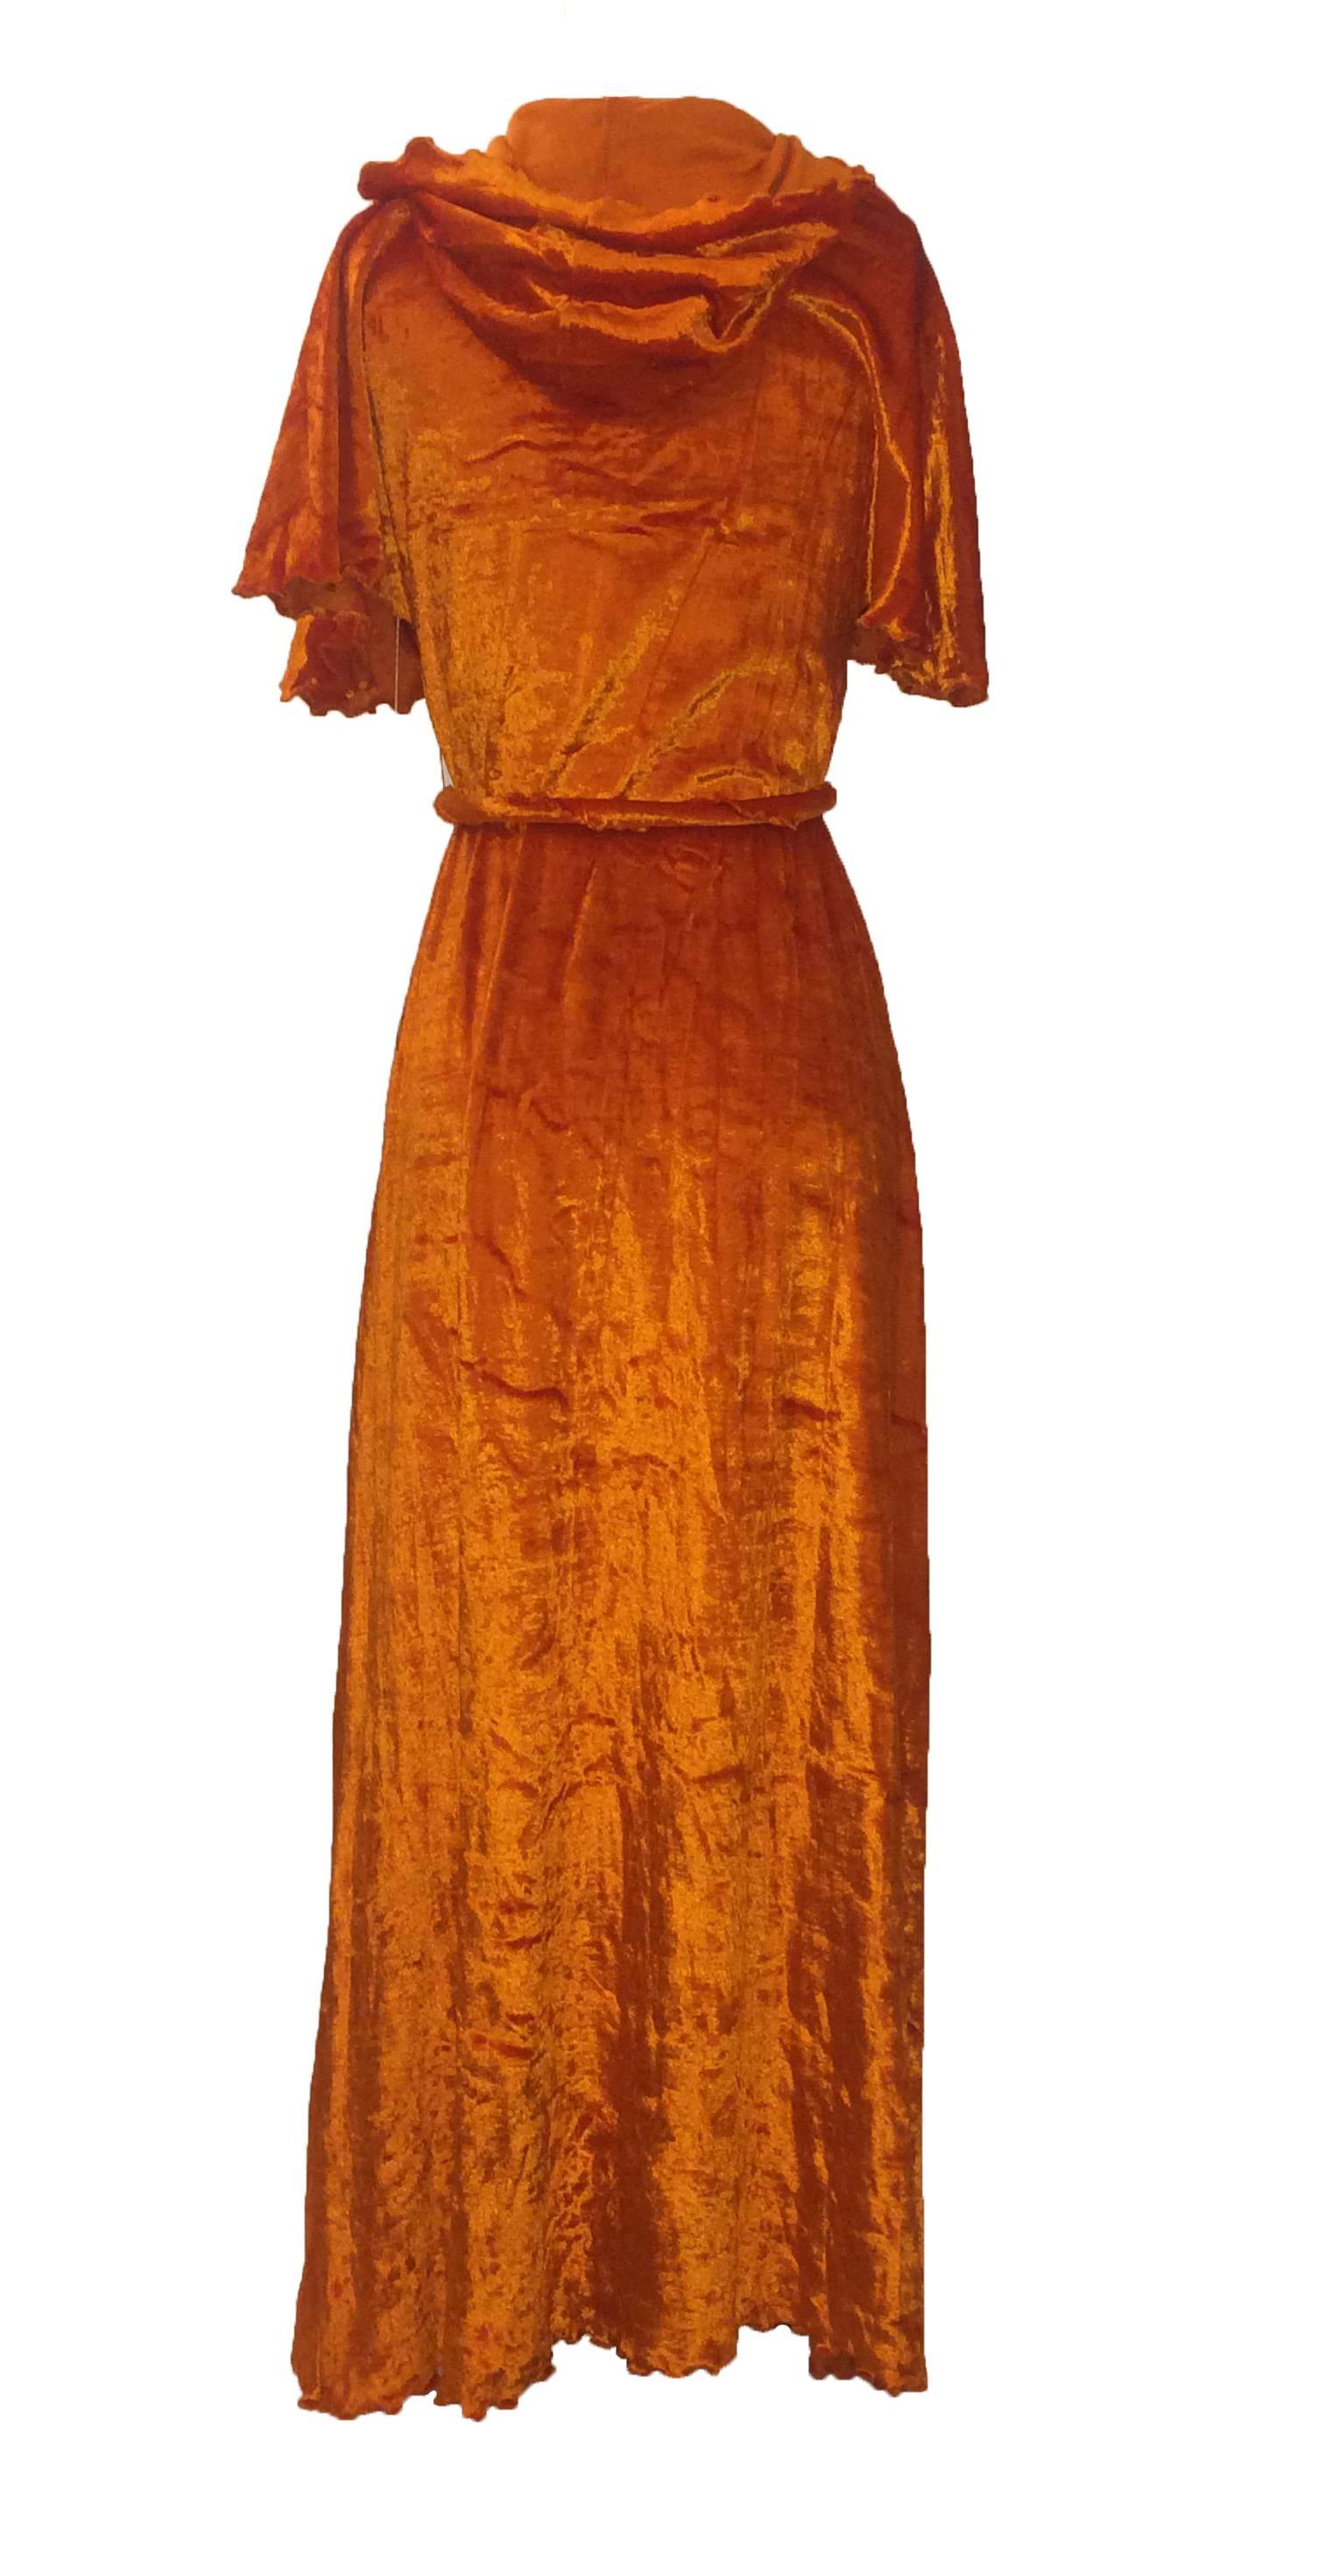 Stephen Burrows Loungewear orange velour robe. Lettuce edge at hood, sleeves, and hem. Includes belt made of twisted velvet with exposed lettuce edge. 

65% acetate, 35% cotton.

Size 10. Would best fit XS/S.

Bust 32